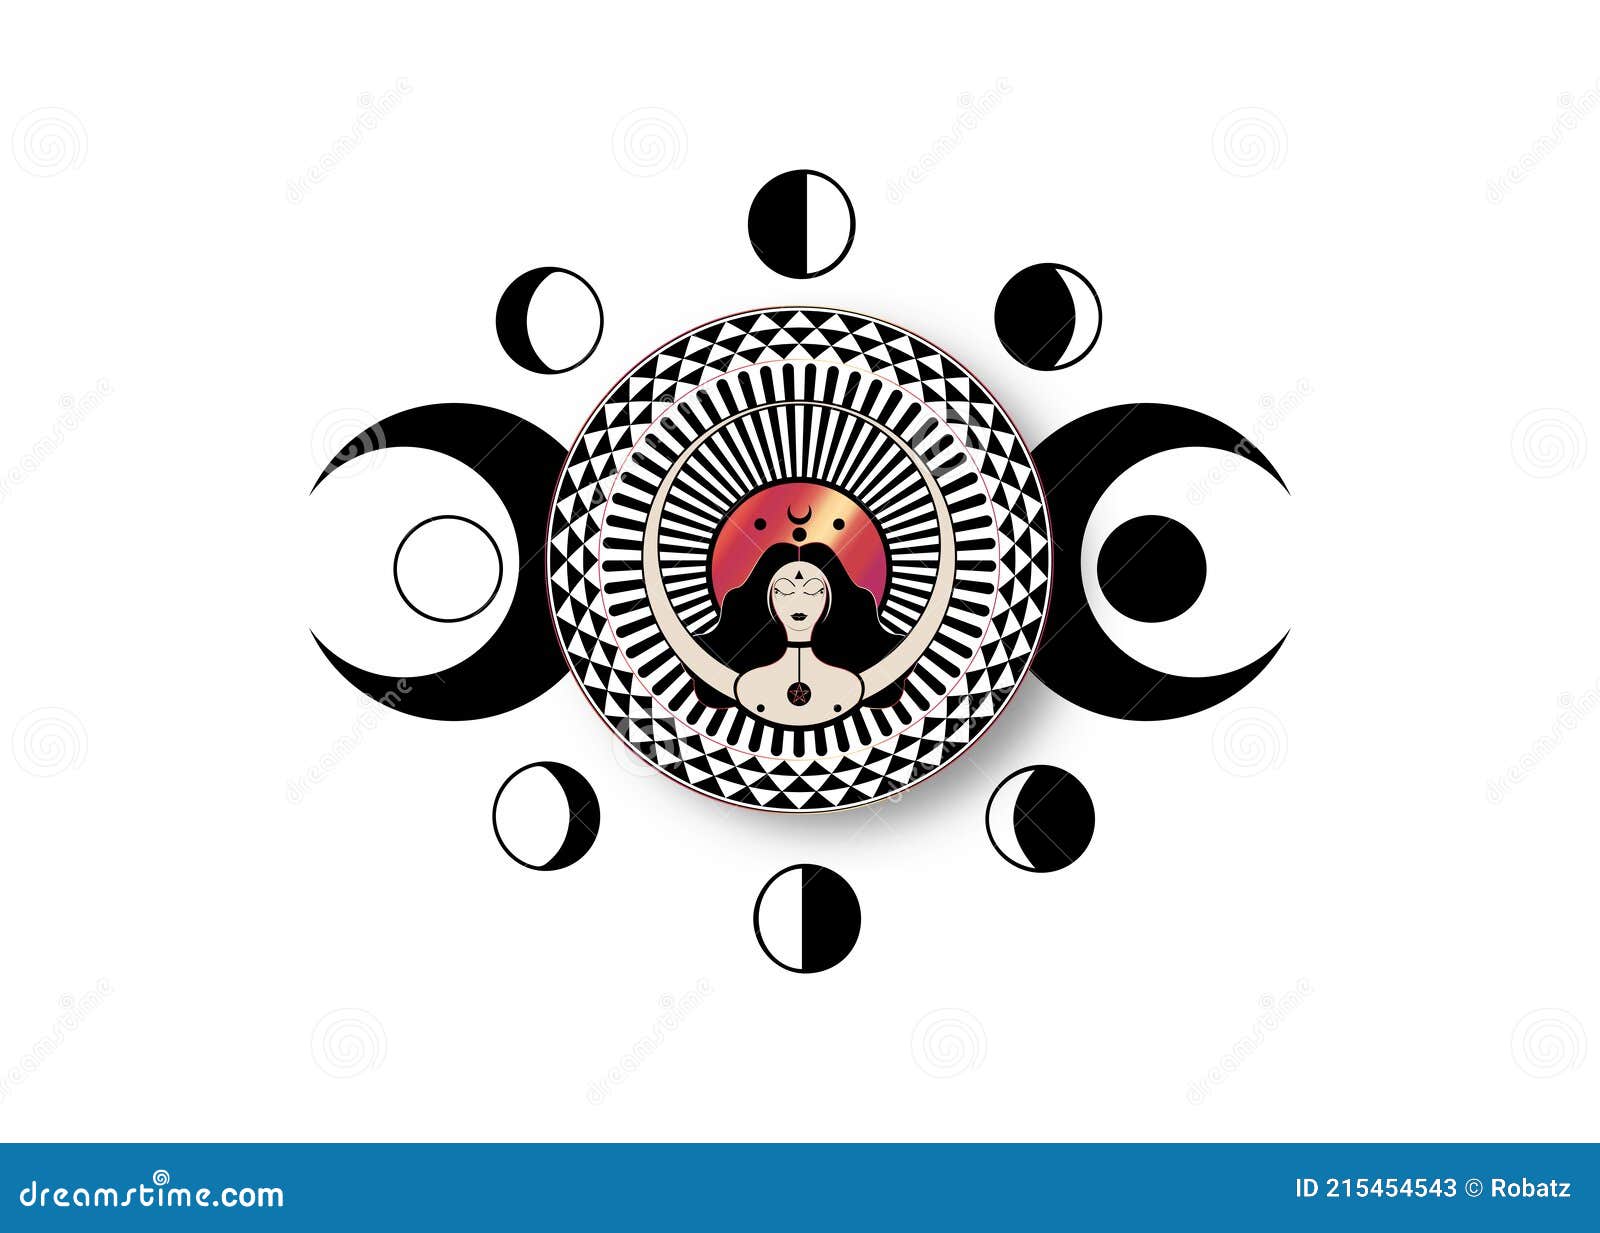 wiccan woman icon, triple goddess  of moon phases. triple moon religious wicca sign. neopaganism logo. lunar calendar cycles